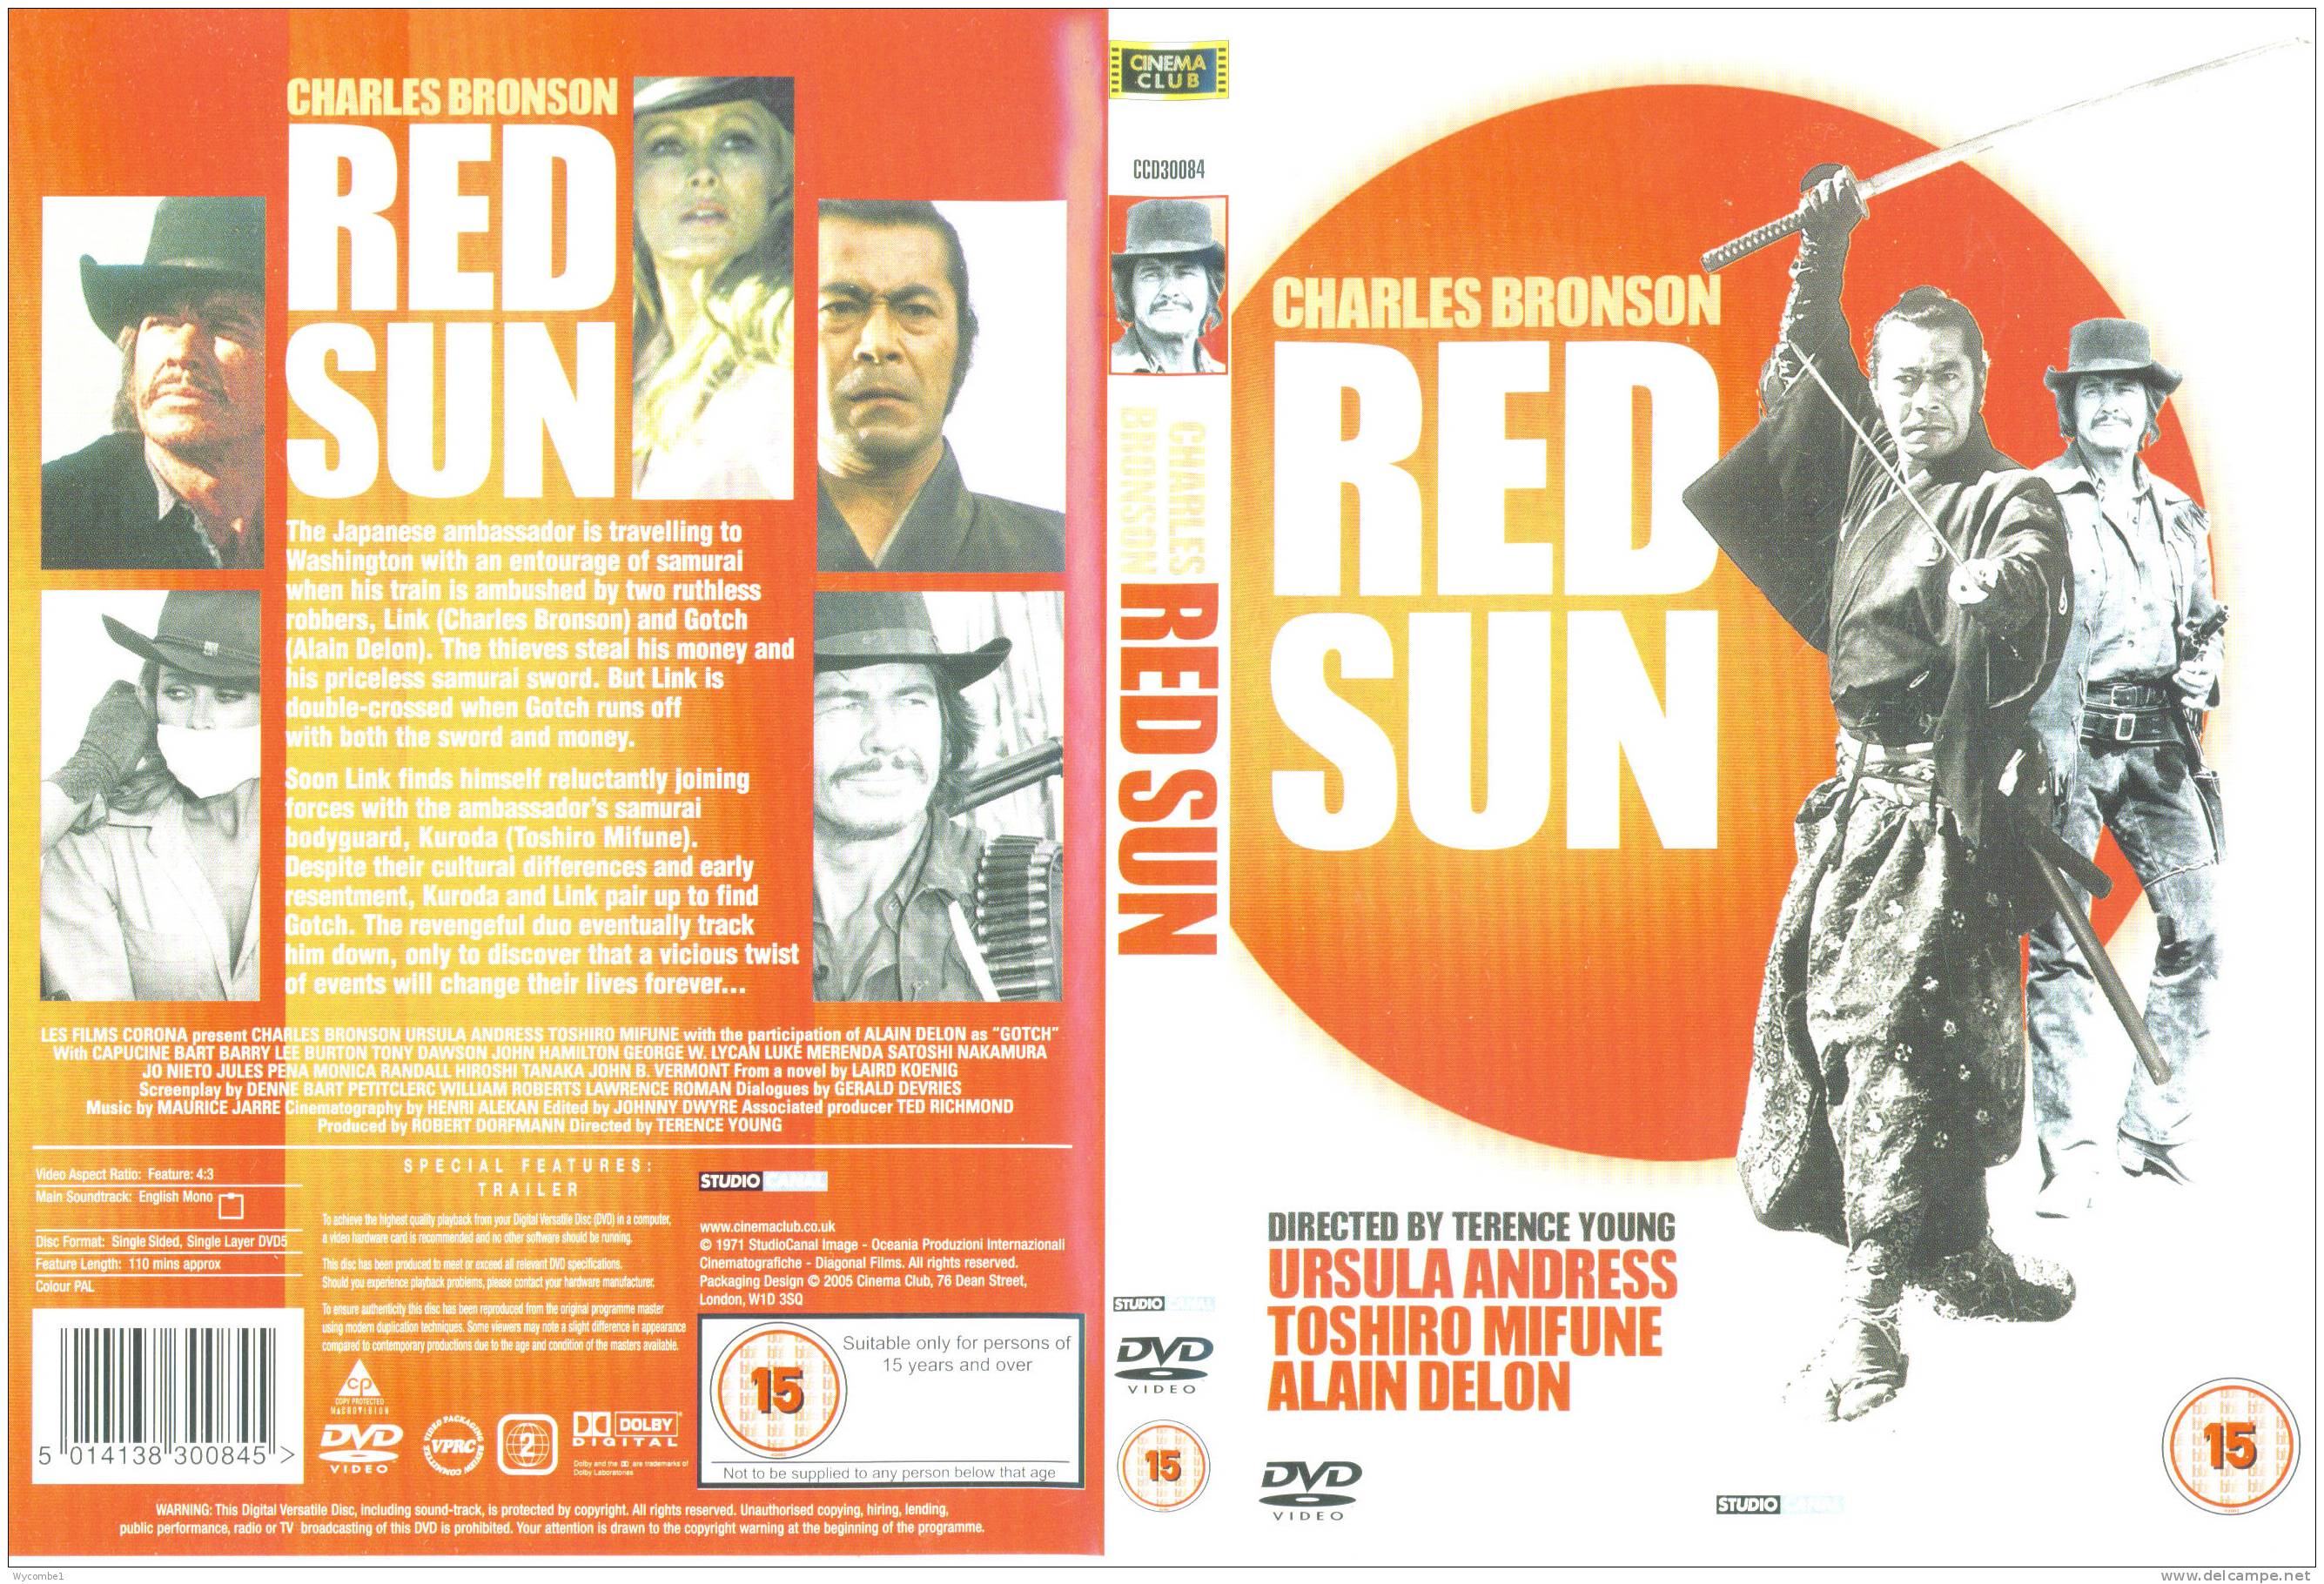 RED SUN - Charles Bronson (Details As Scan) - Western